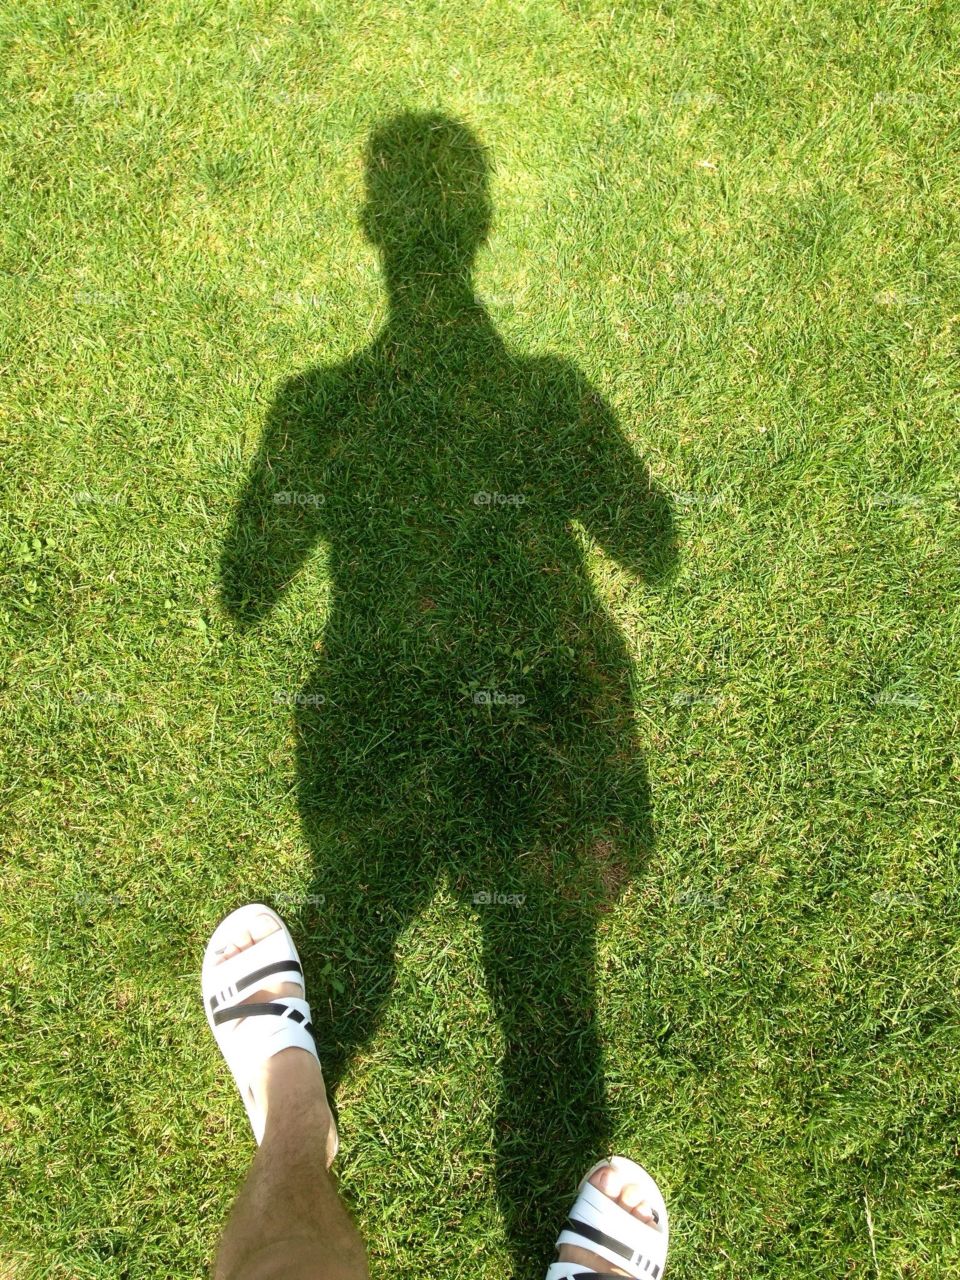 The green lawn with the shadow of a man